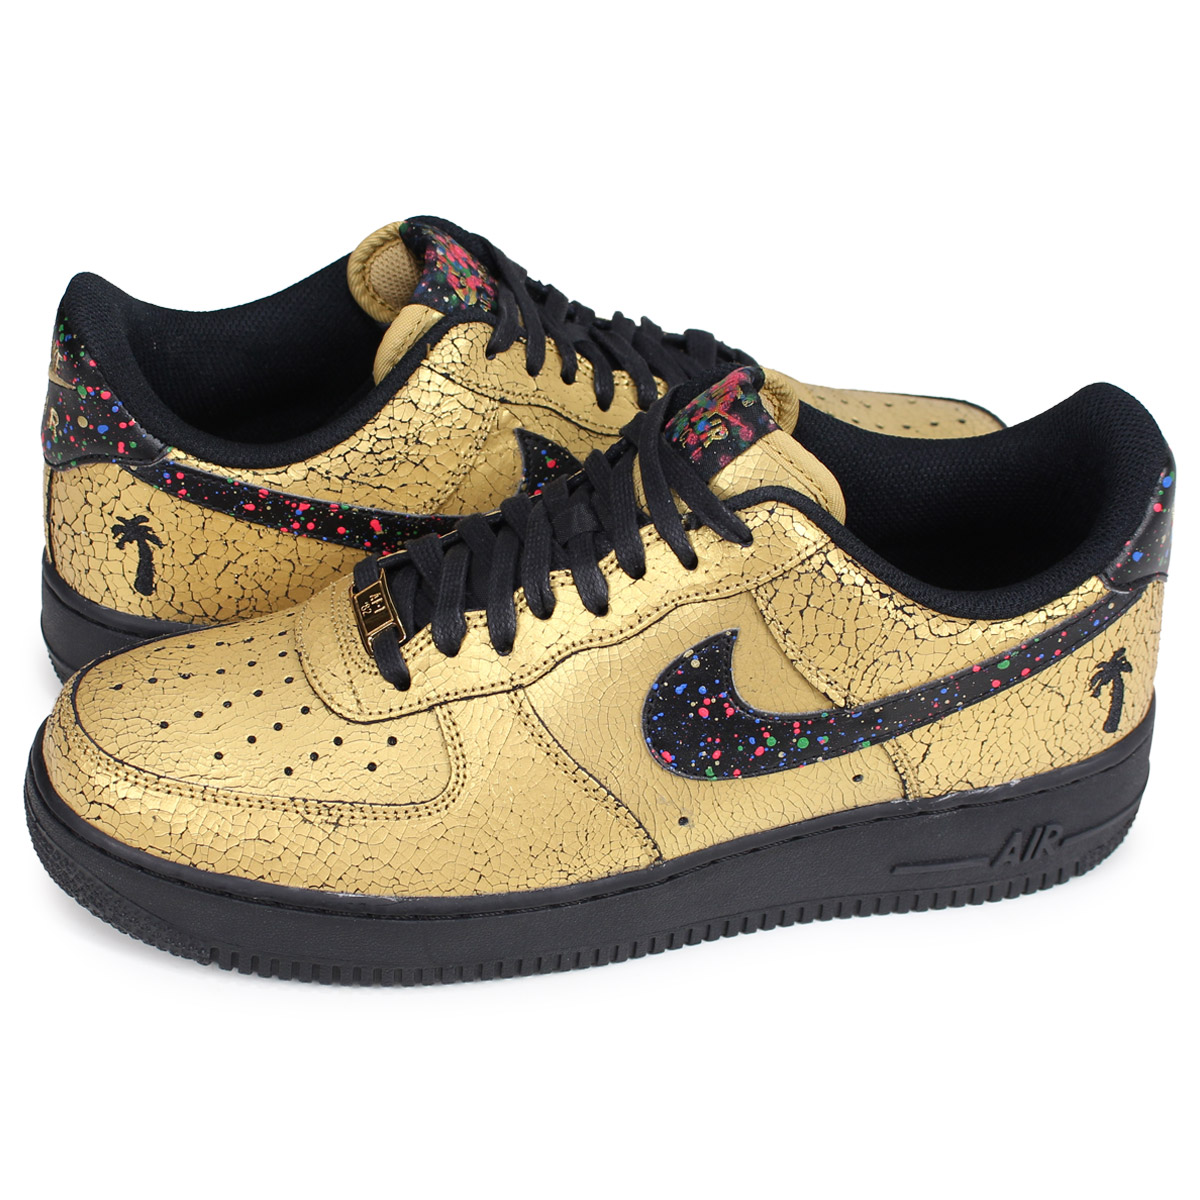 gold air forces 1